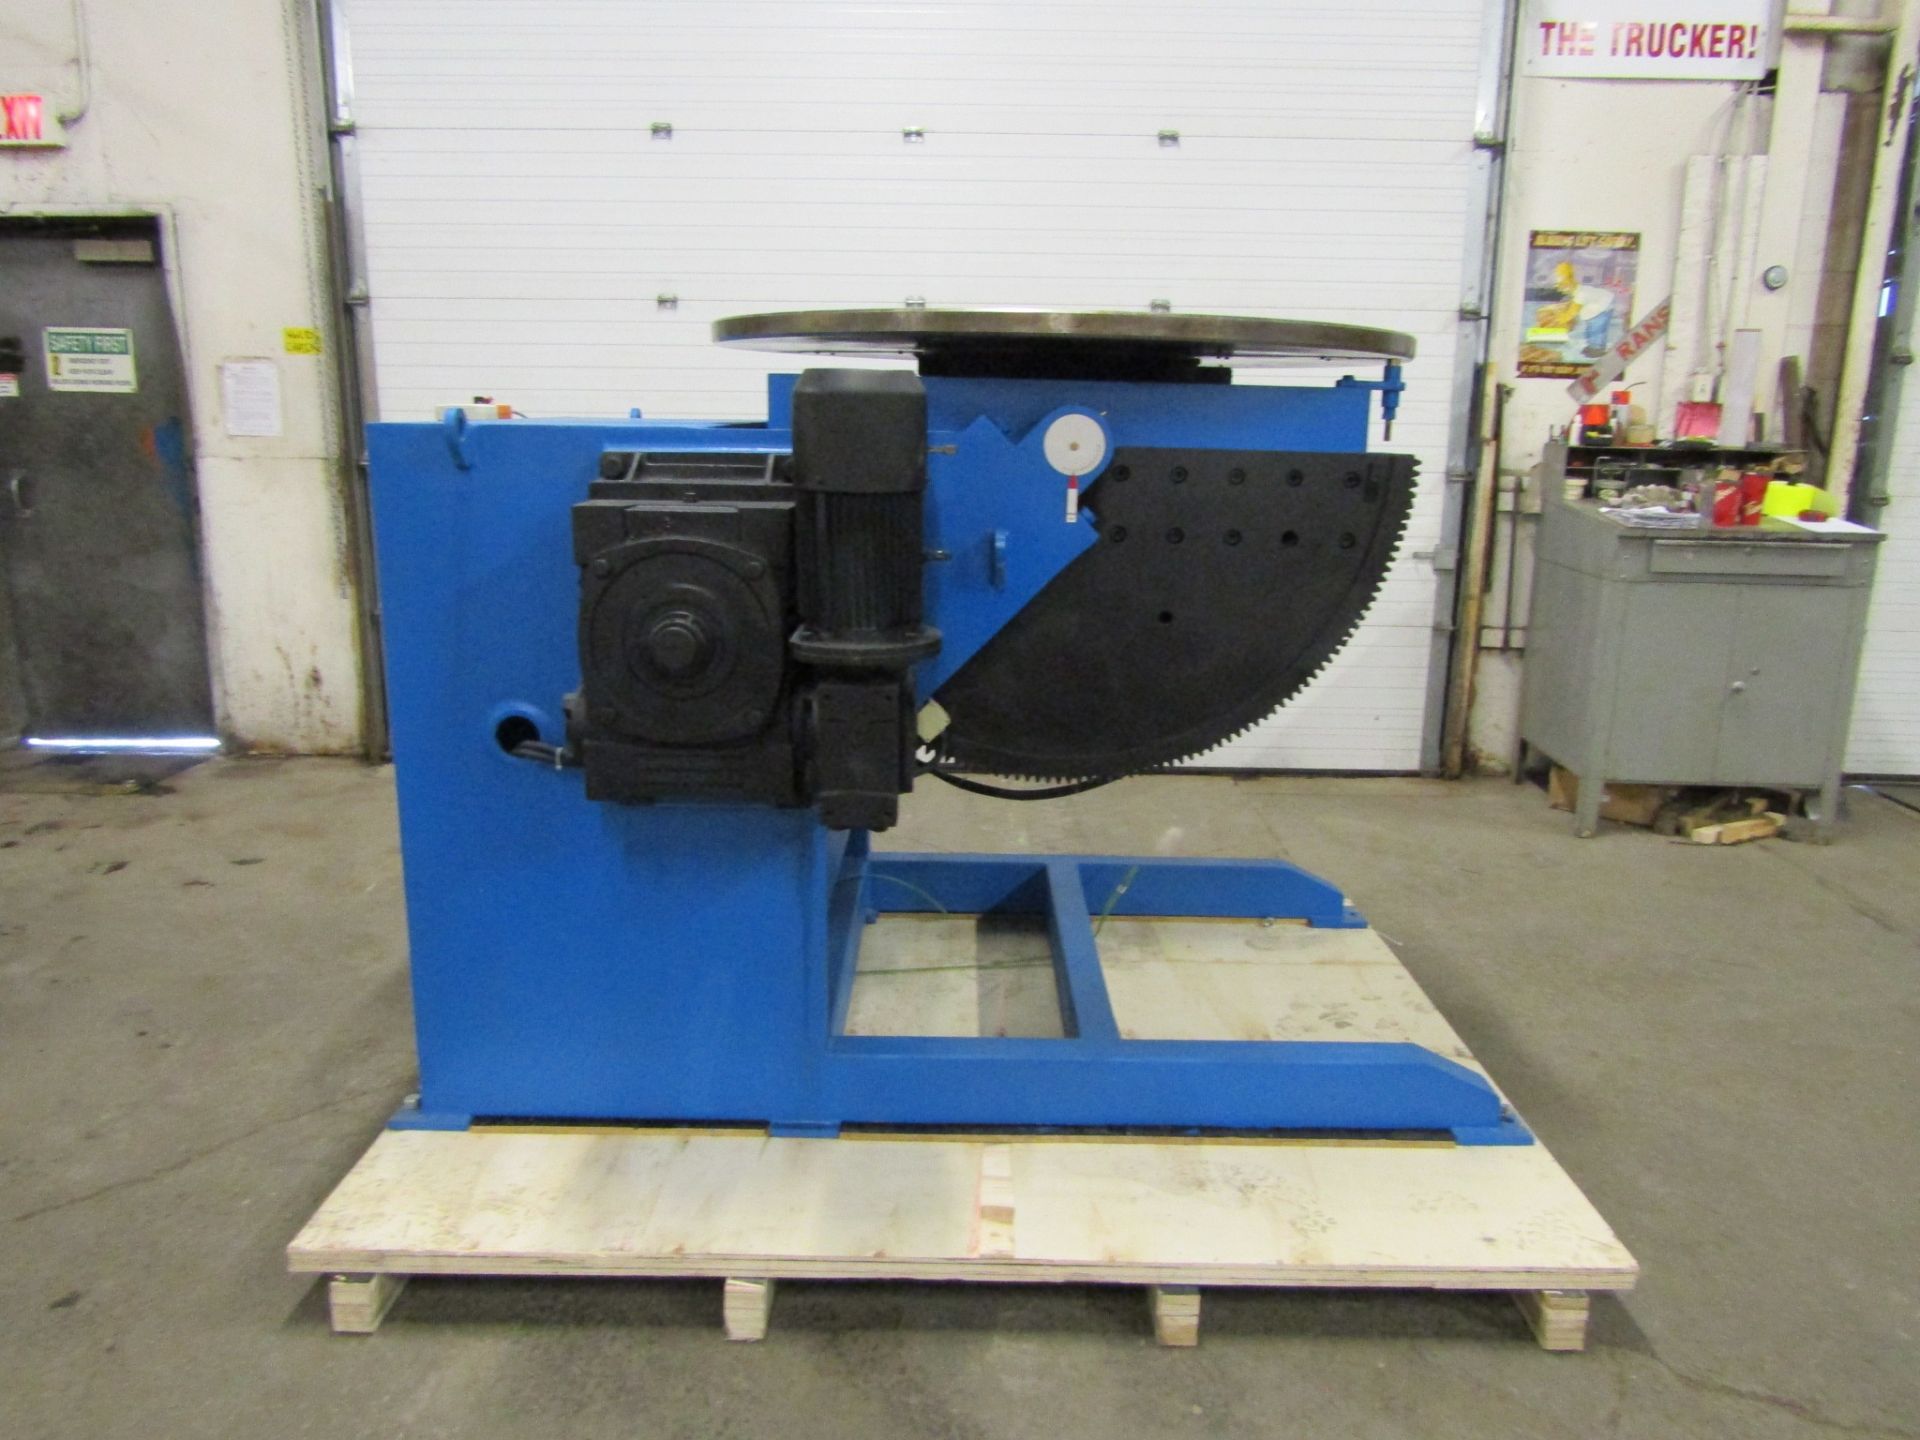 Verner model VD-8000 WELDING POSITIONER 8000lbs capacity - tilt and rotate with variable speed drive - Image 4 of 4